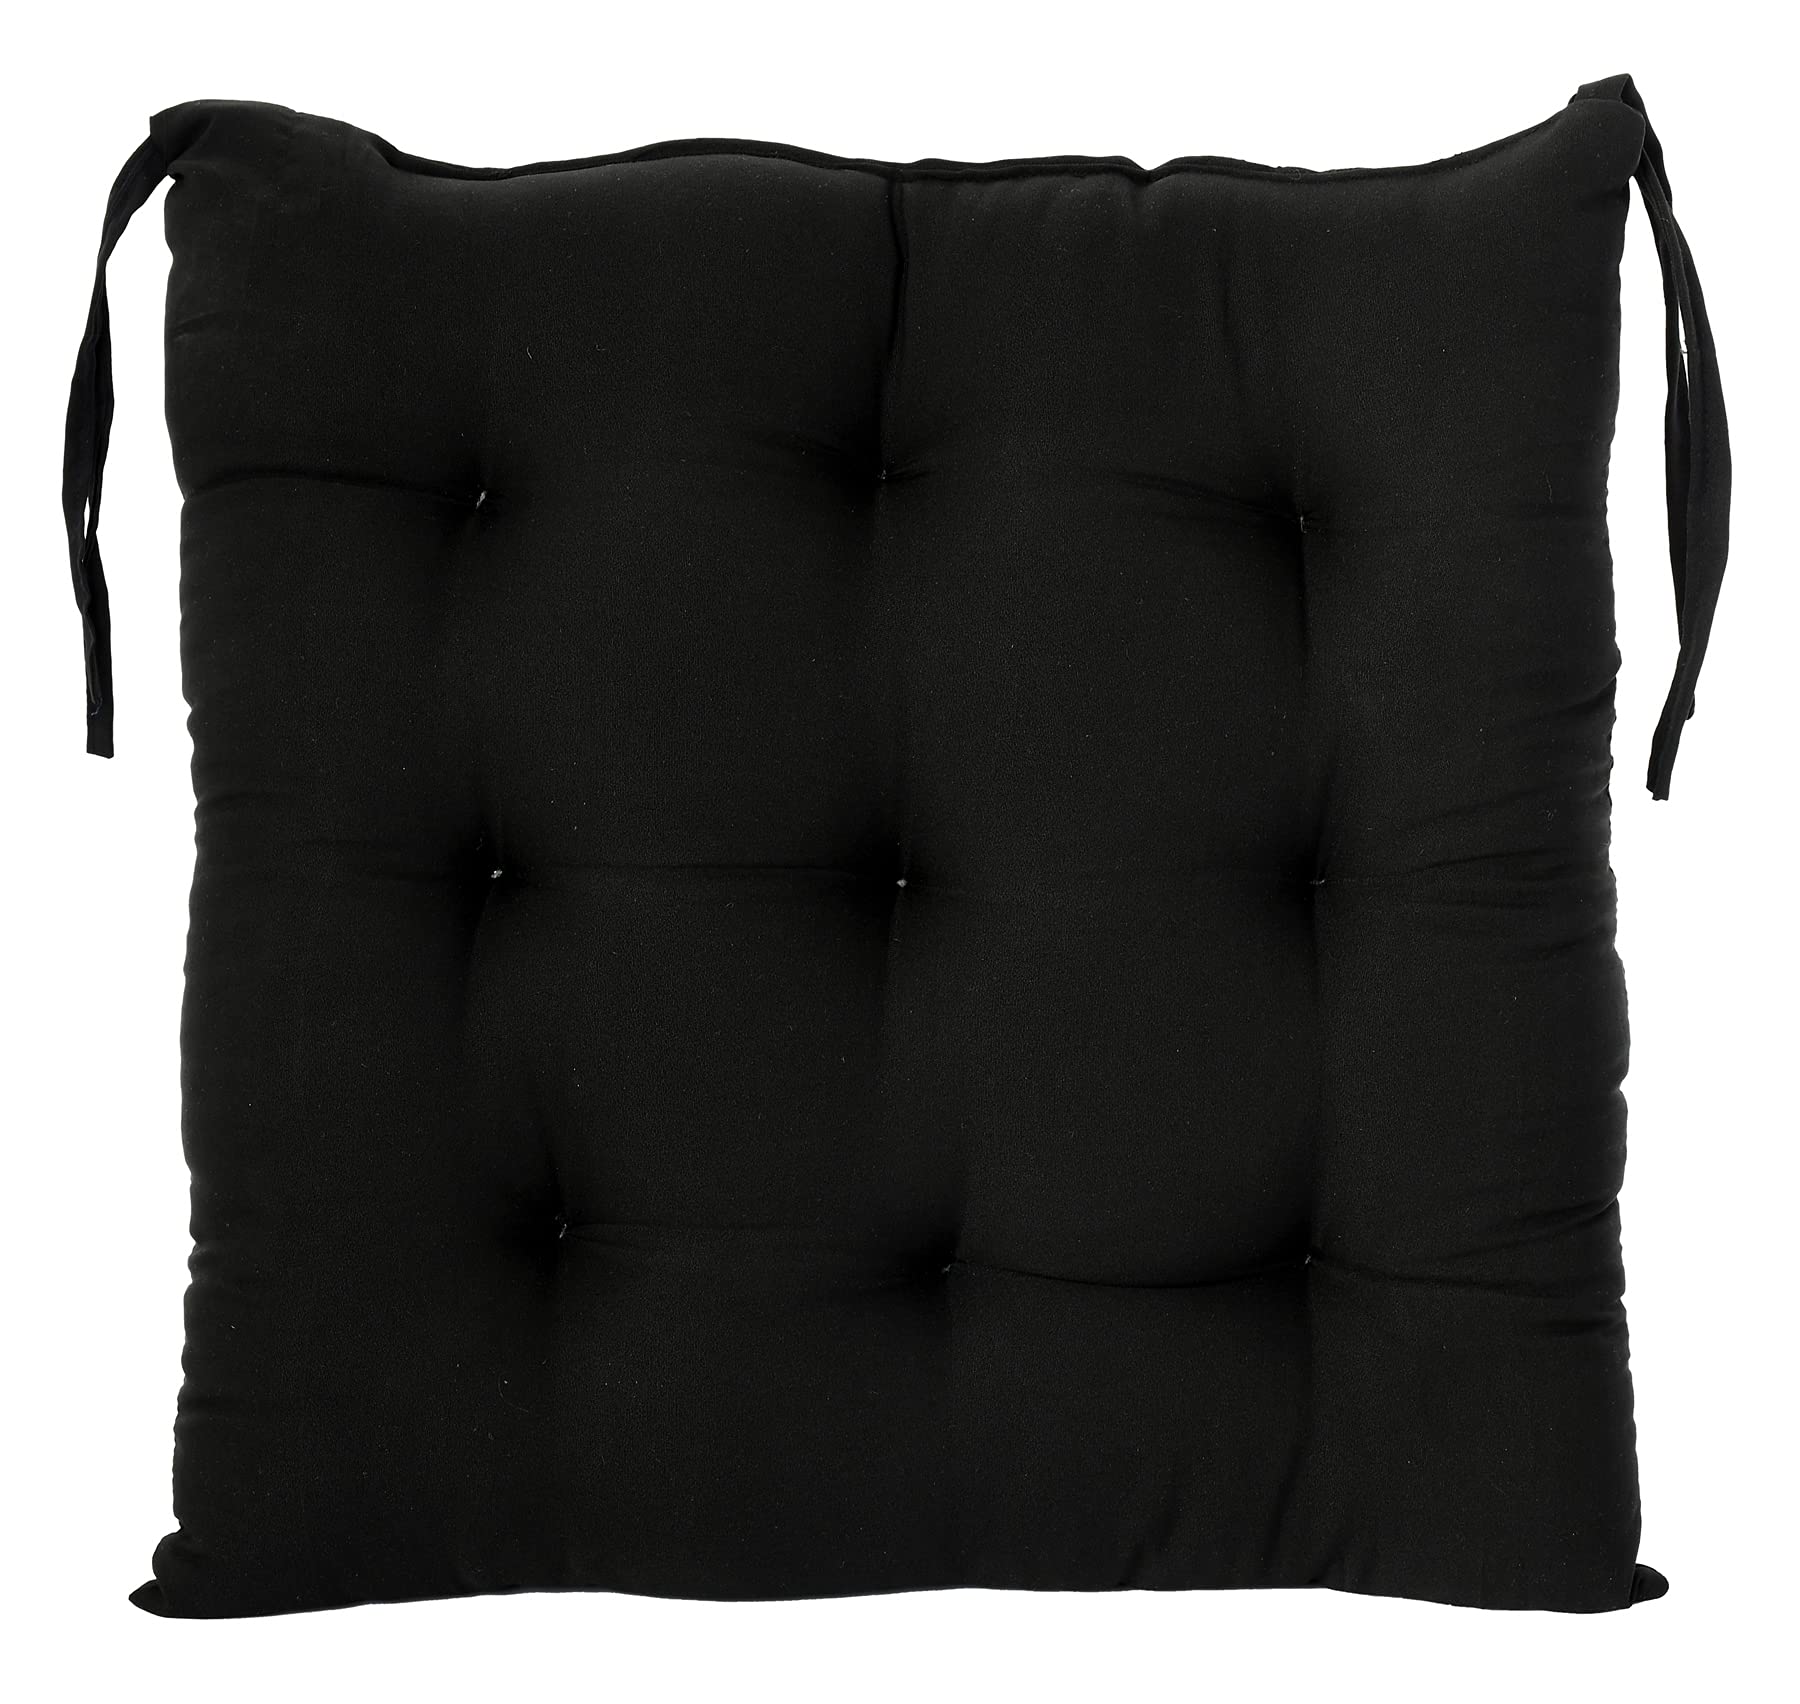 Kuber Industries Chair Pad|Chair Cushion Pad|Chair Cushion with Ties, Pack of 2 (Black)